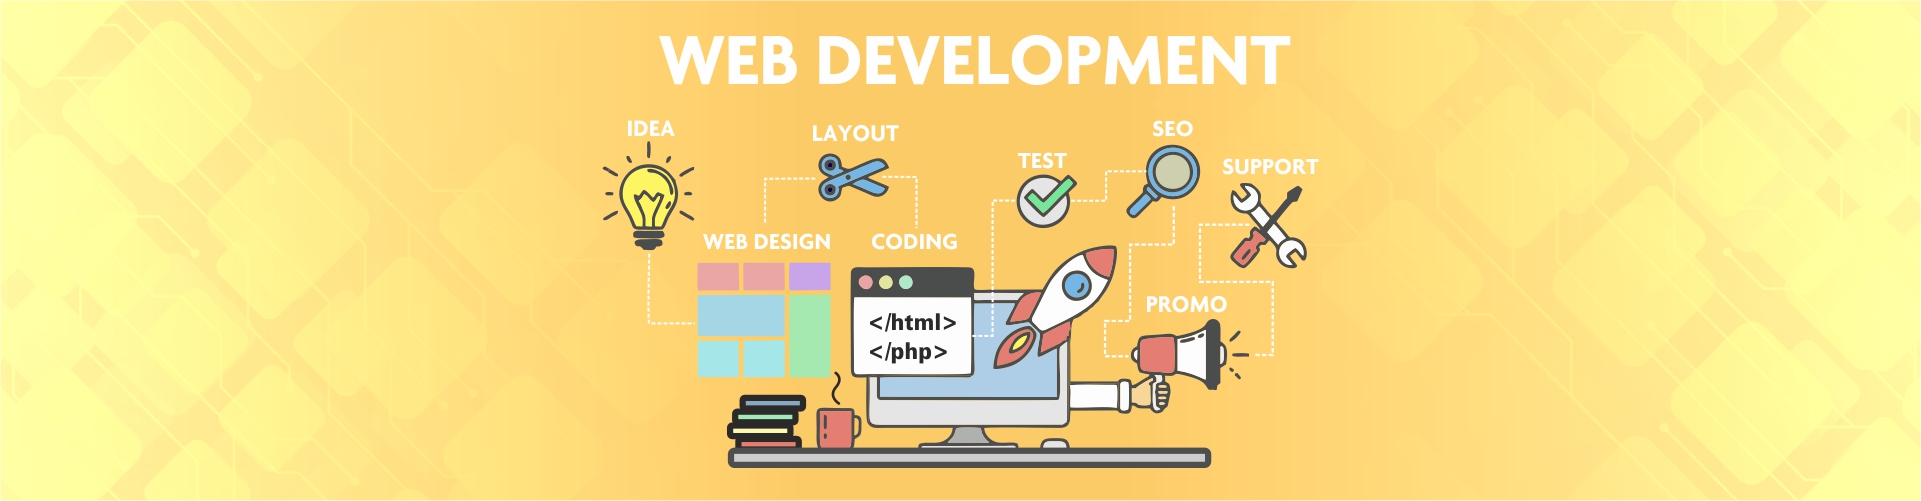 Creative web development services, Web technologies development services, Development technology Integration services, online marketer and web development, Topnotch development services, Web development integration services